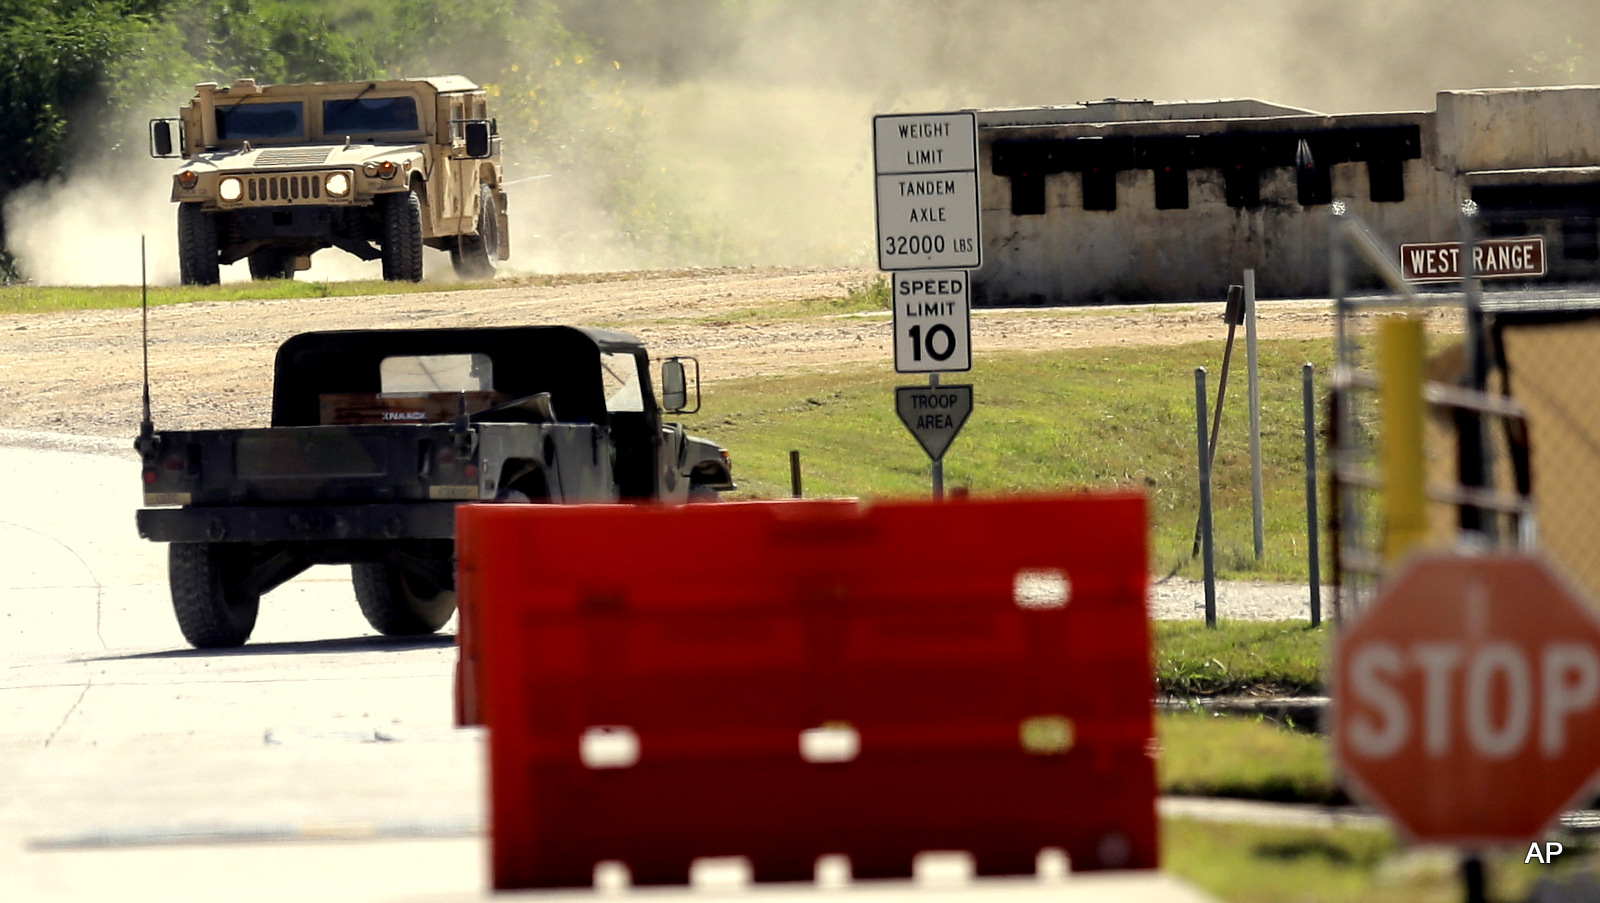 Military vehicles are seen at Texas Army National Guard Camp Swift, Wednesday, July 15, 2015, in Bastrop, Texas. Jade Helm 15, a summer military training exercise, that has aroused alarm among some Texans, begins Wednesday outside the Central Texas town of Bastrop. 